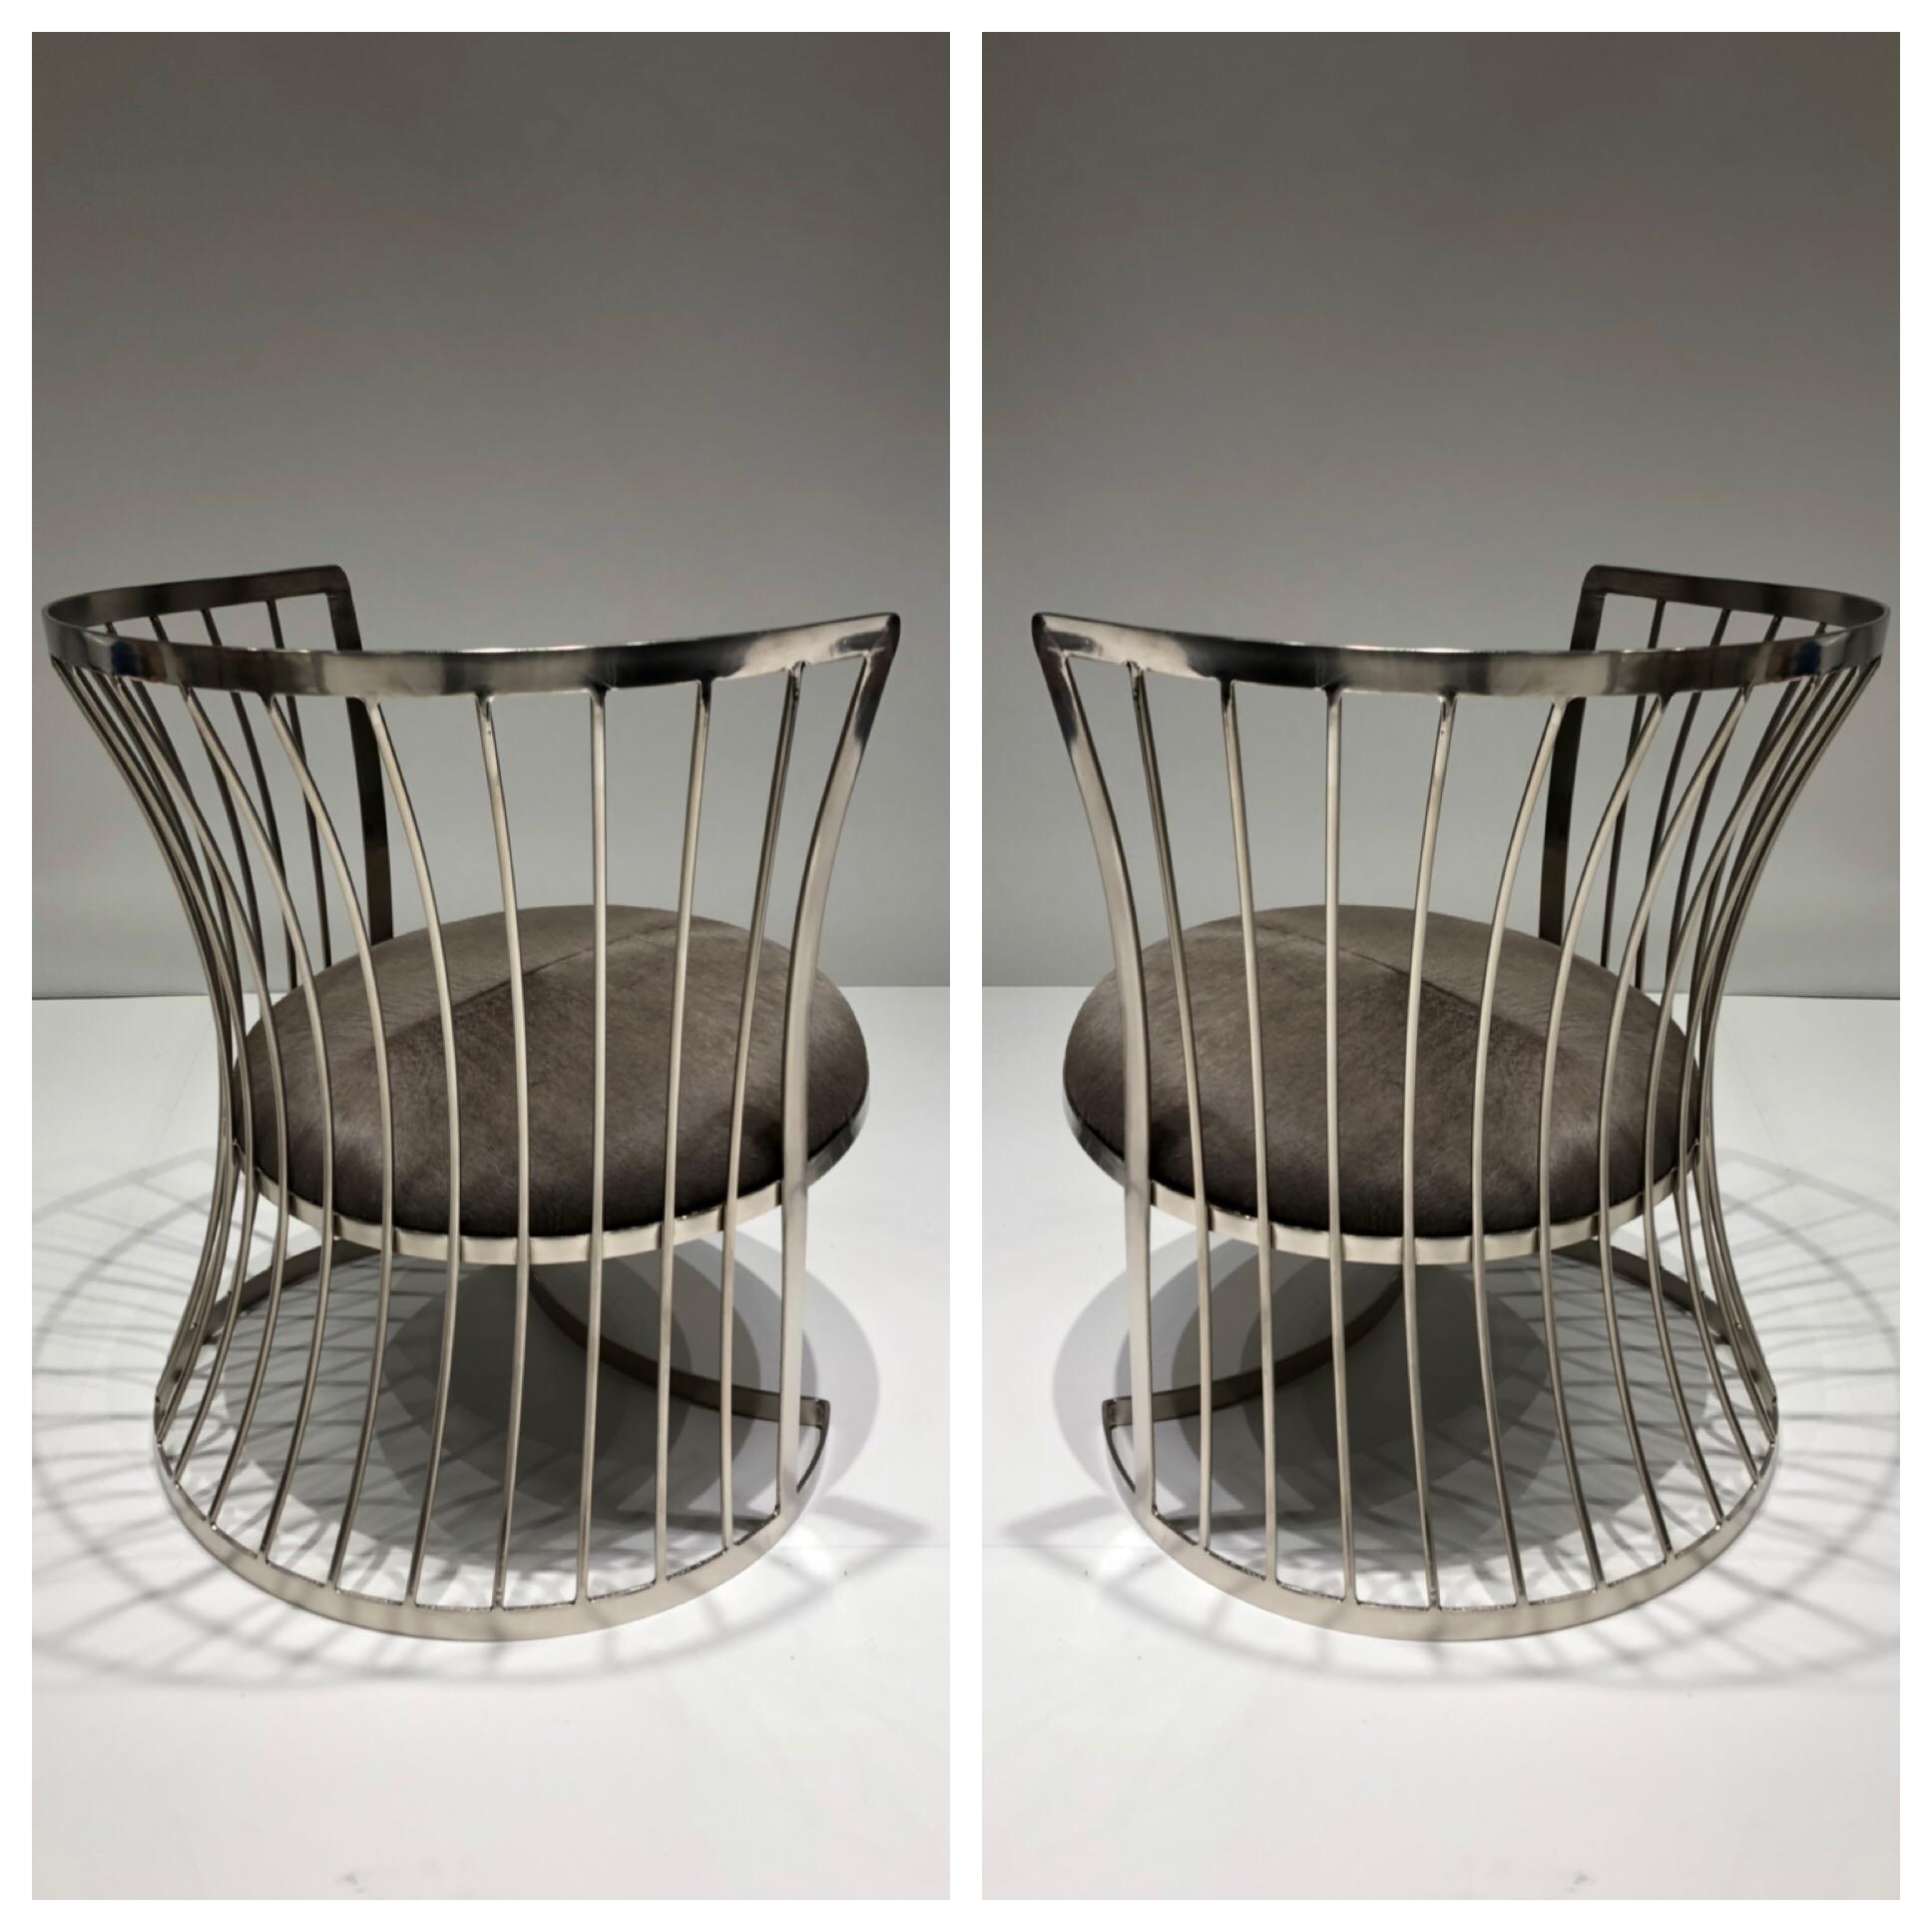 A glamorous pair of satin nickel lounge chairs, design in the 1960s by Russell Woodard. The chairs have been newly replated and the seats recovered in a gray cowhide.
Dimensions: 26.5” high 25” diameter 15” seat.